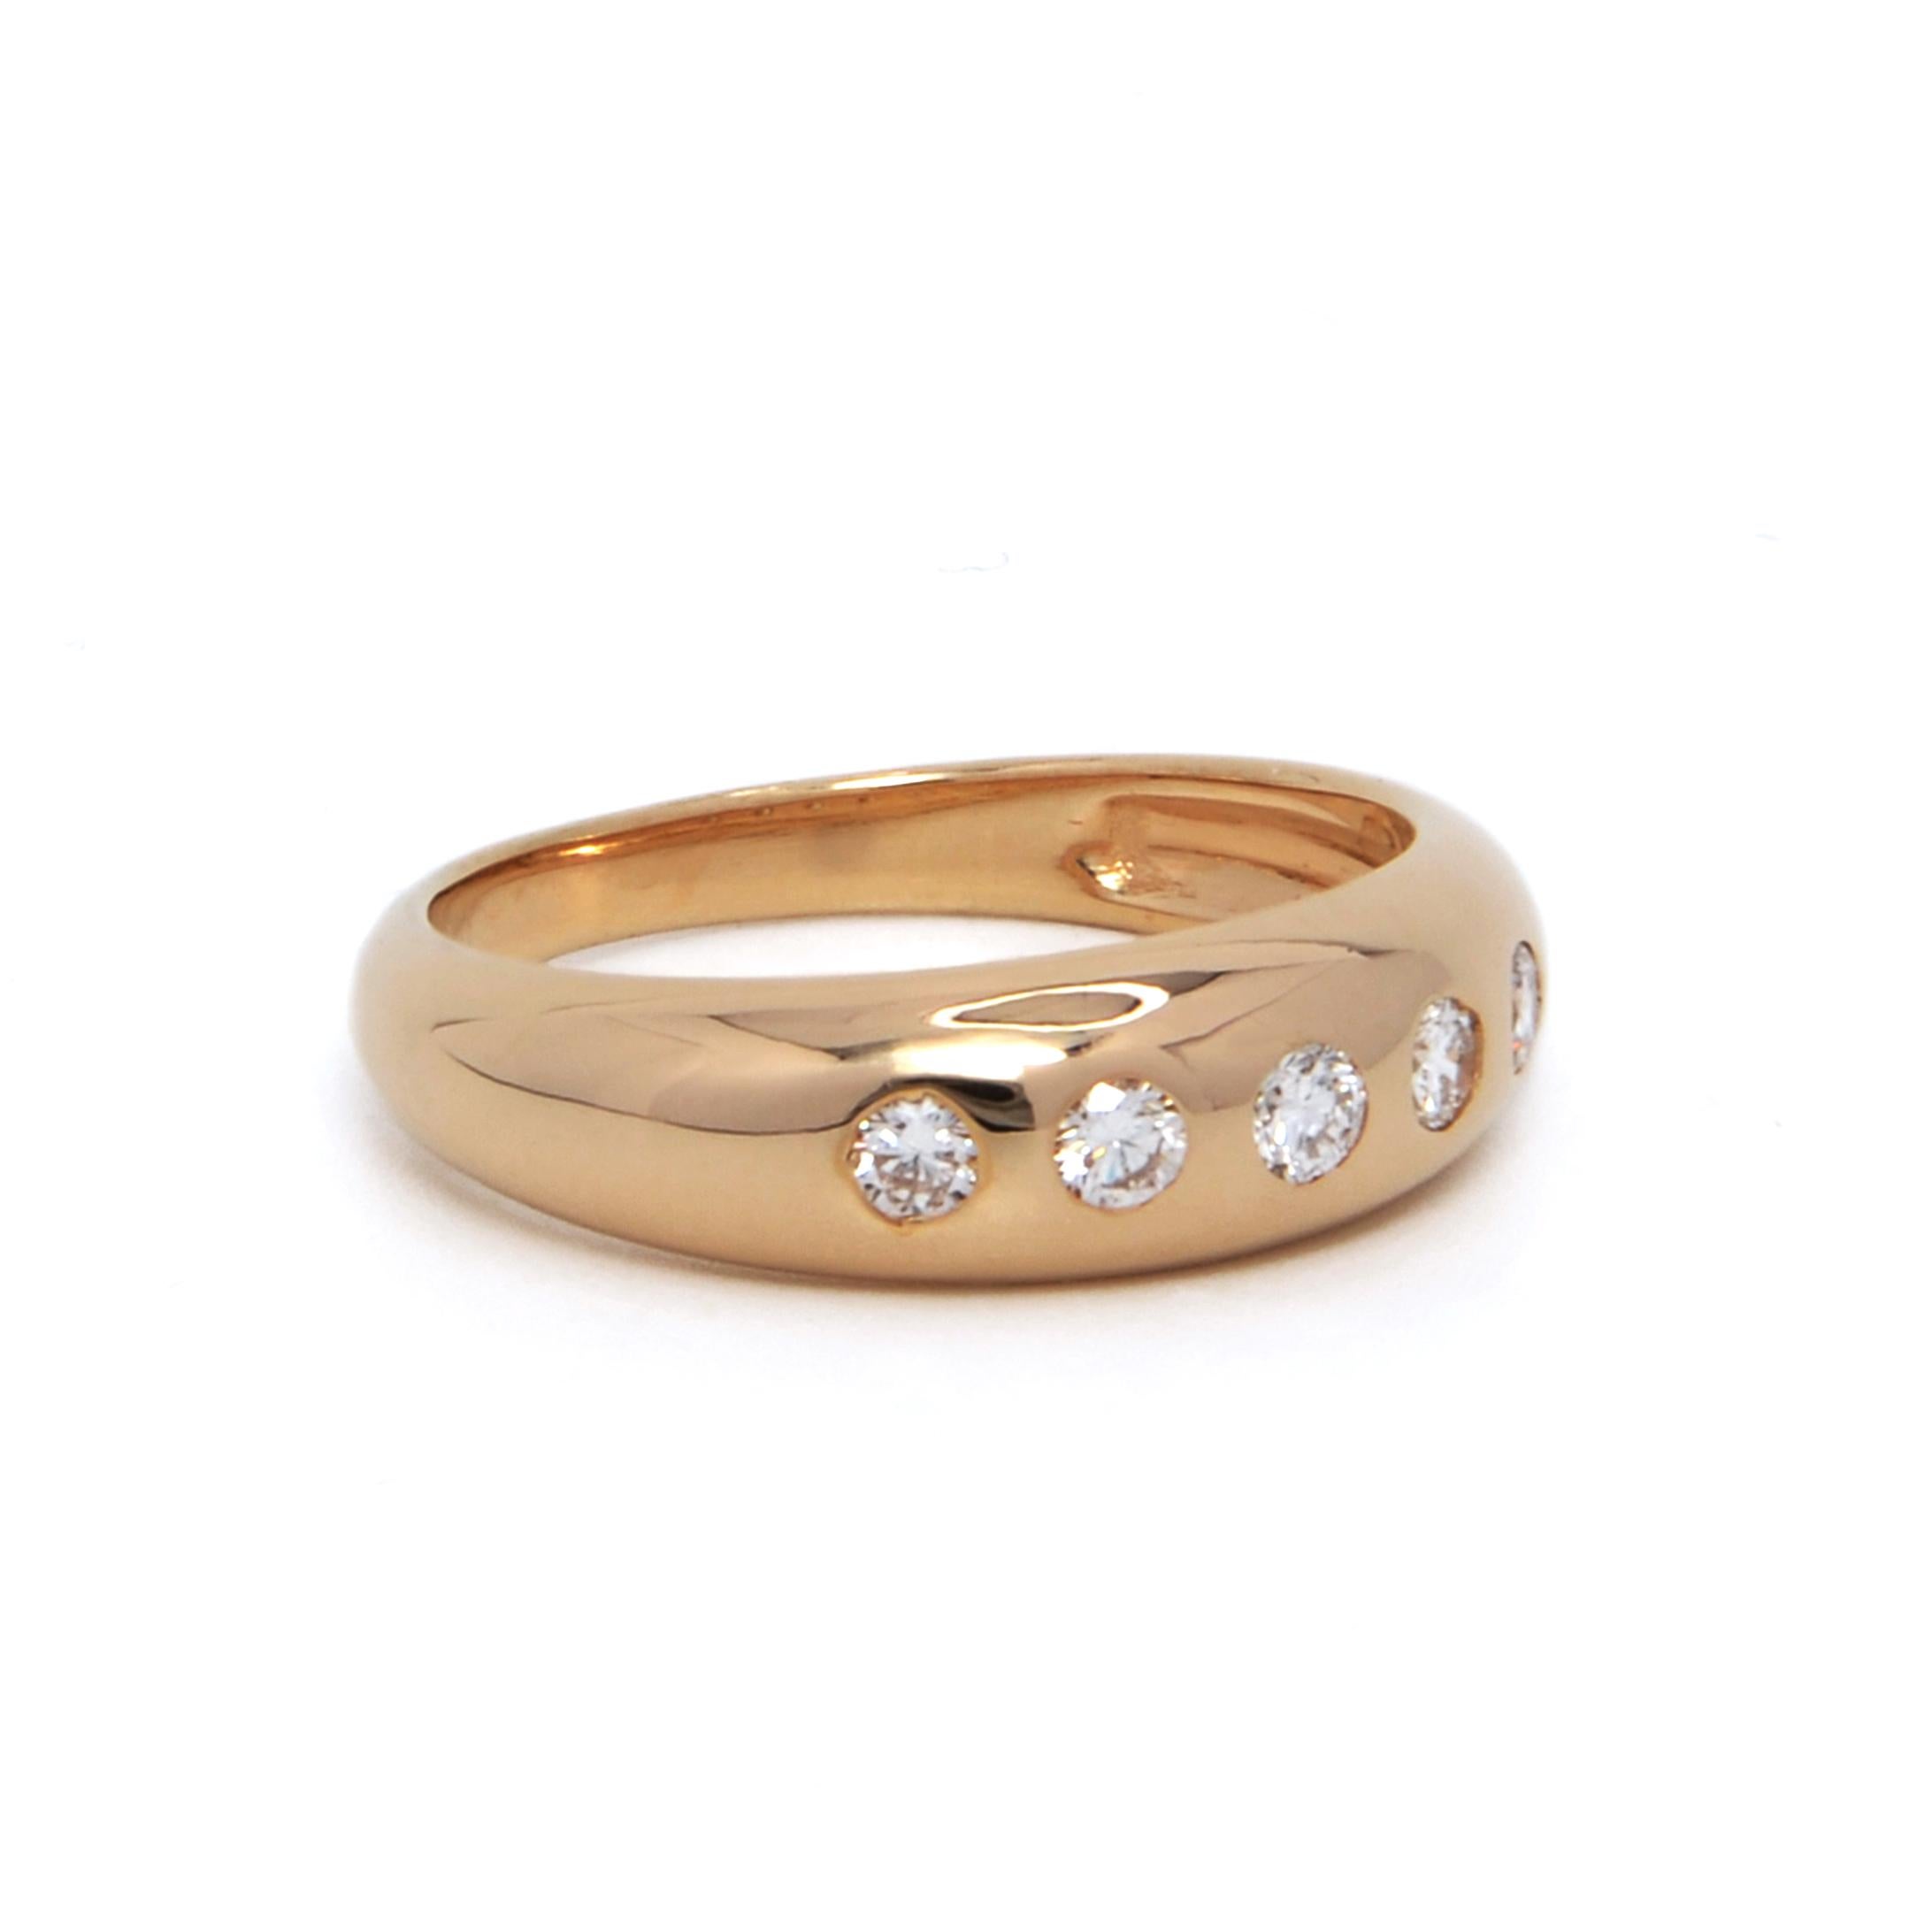 For Sale:  Fem Ring, 5 Stone Diamond Ring in 14k Yellow Gold 3